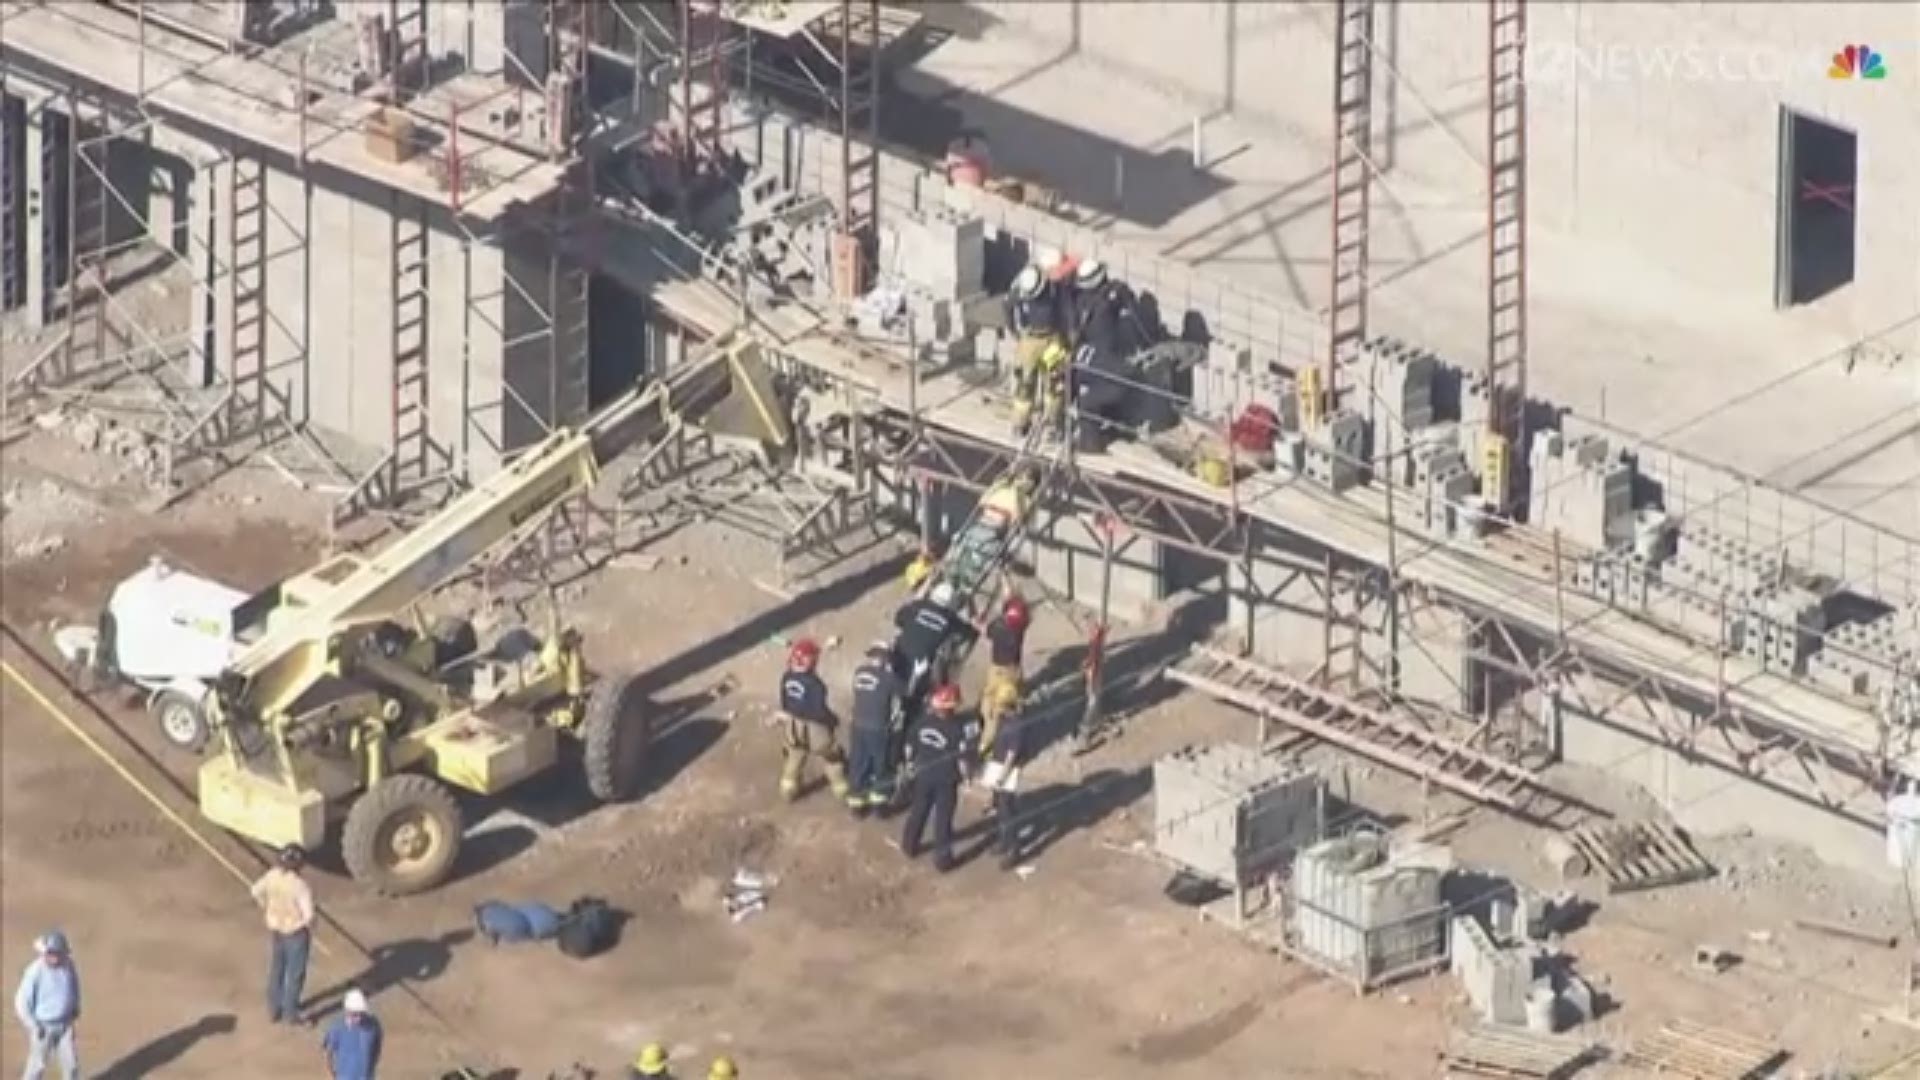 A worker became trapped on scaffolding after cinder blocks fell from a nearby stack at a construction site near Osborn and 37th Avenue in Phoenix. The worker was transported to a local trauma center in stable condition according to Phoenix Fire.